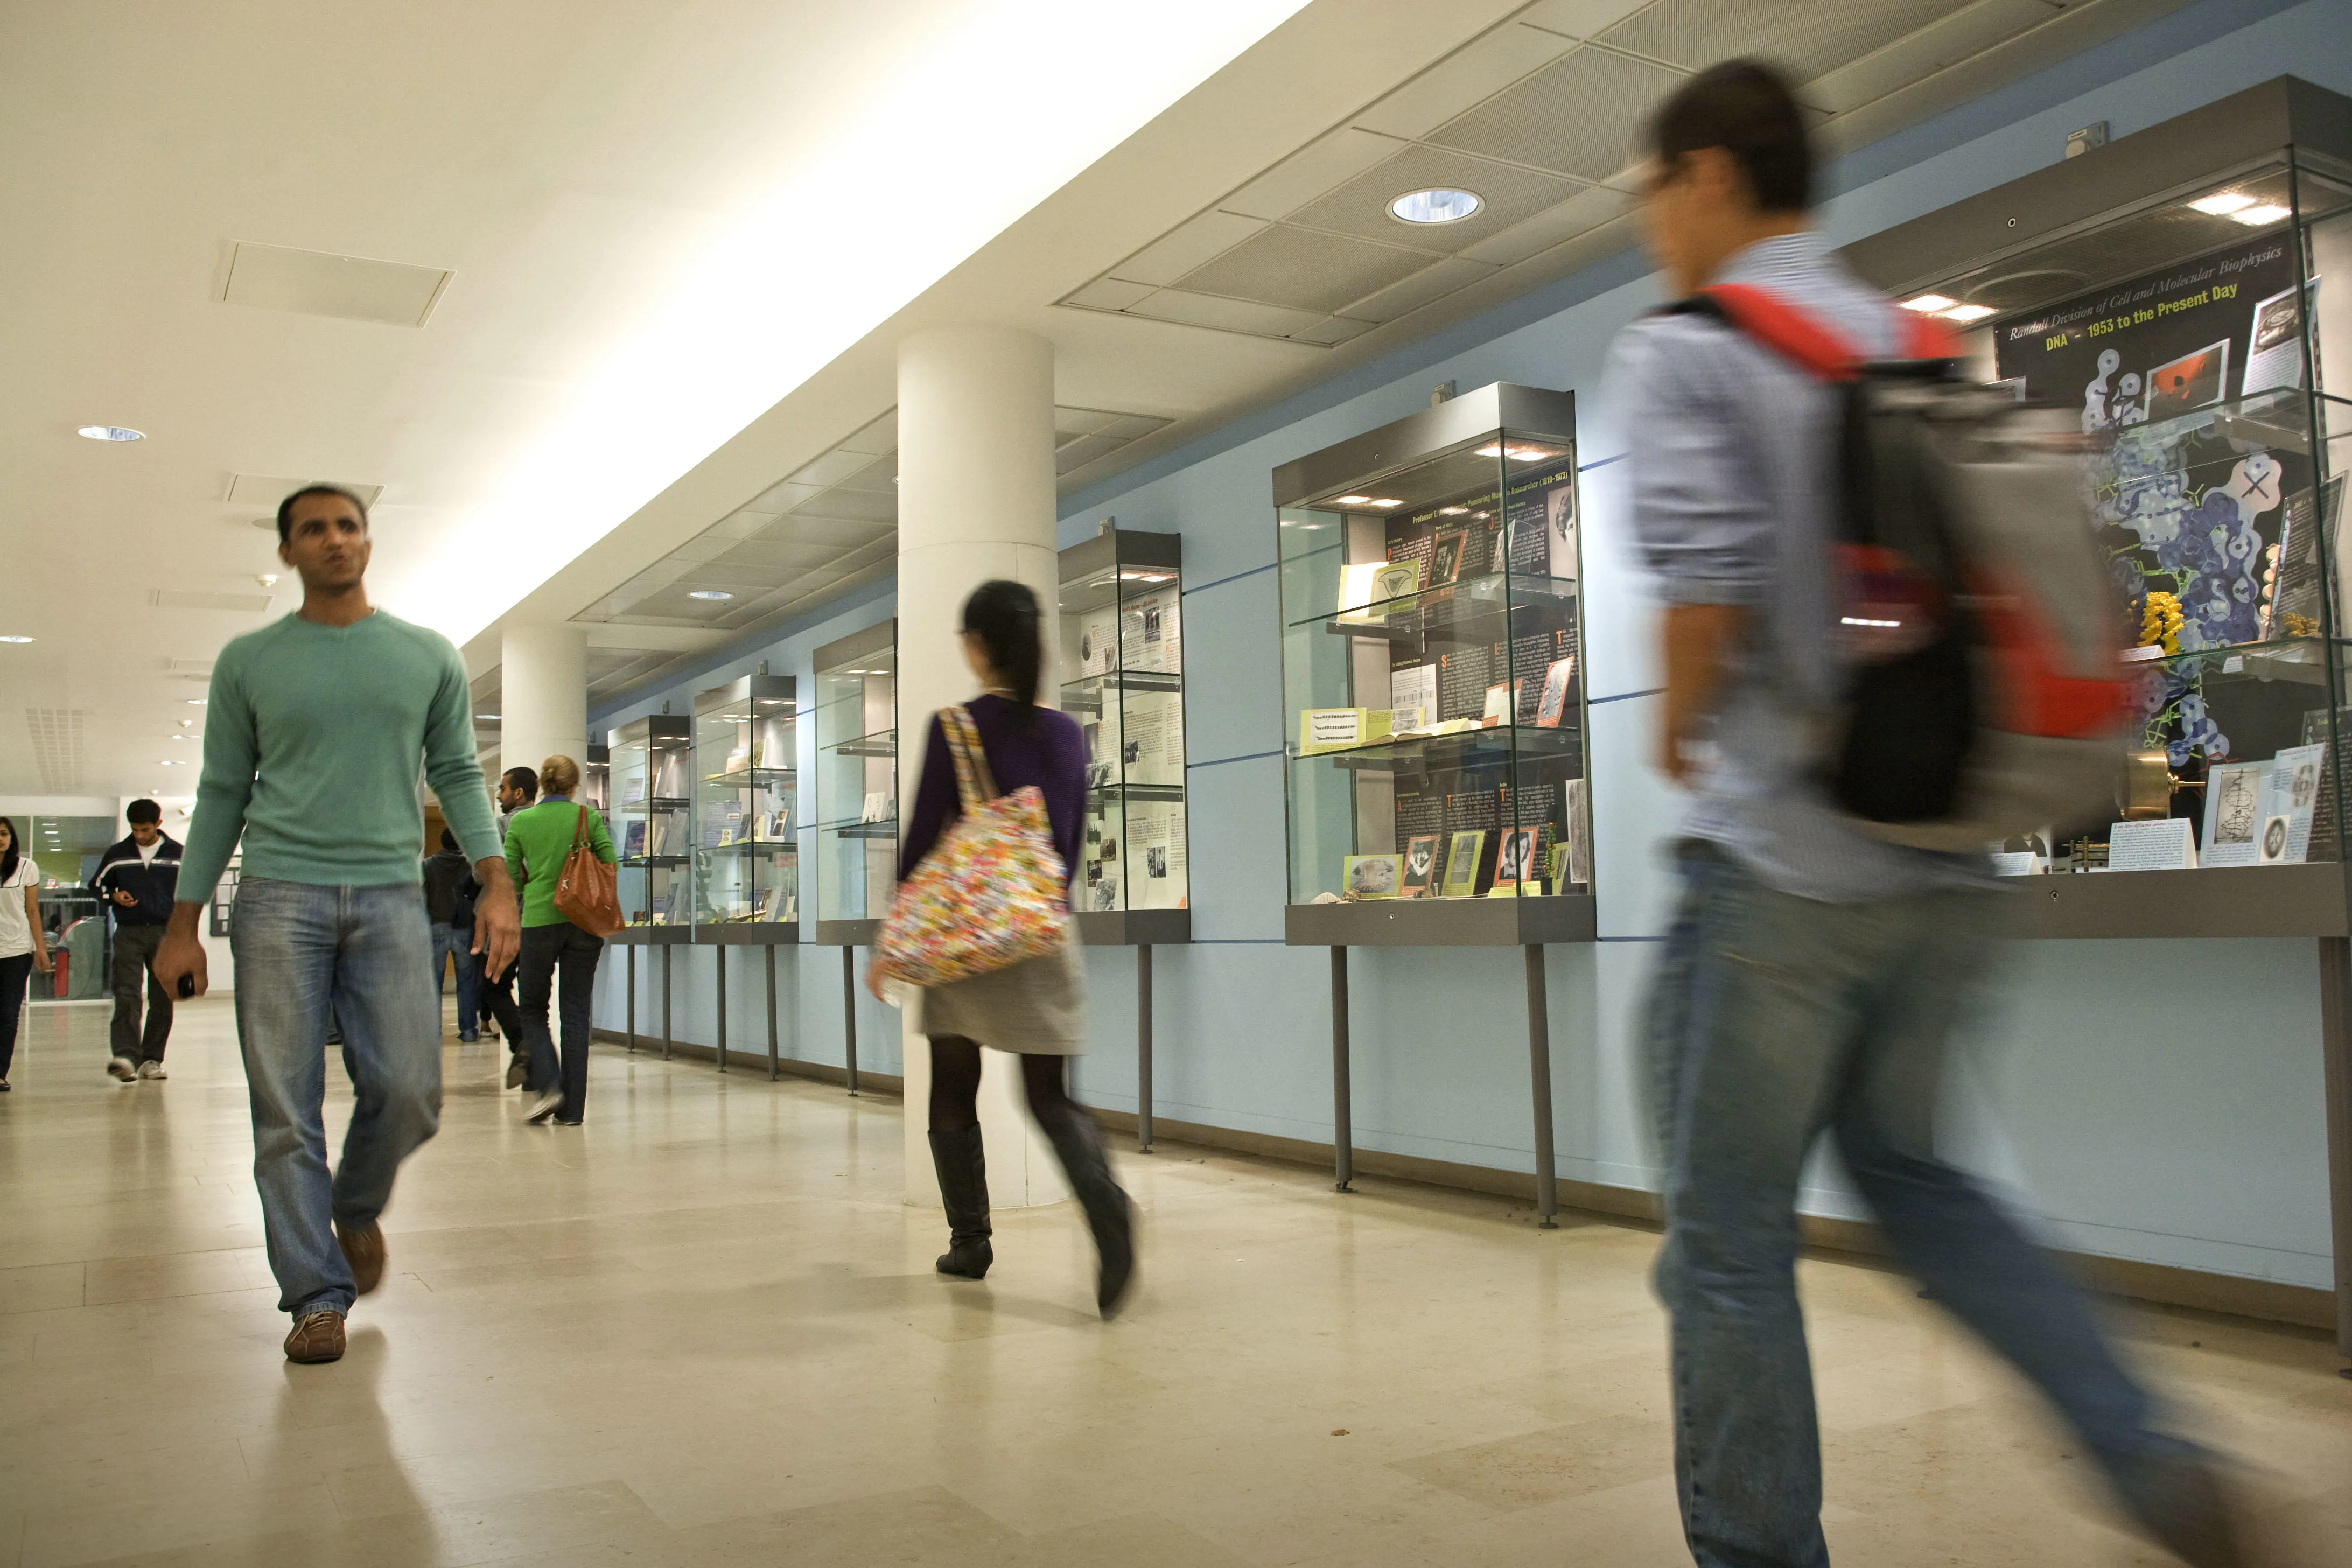 King's Students walking through a corridor on Campus